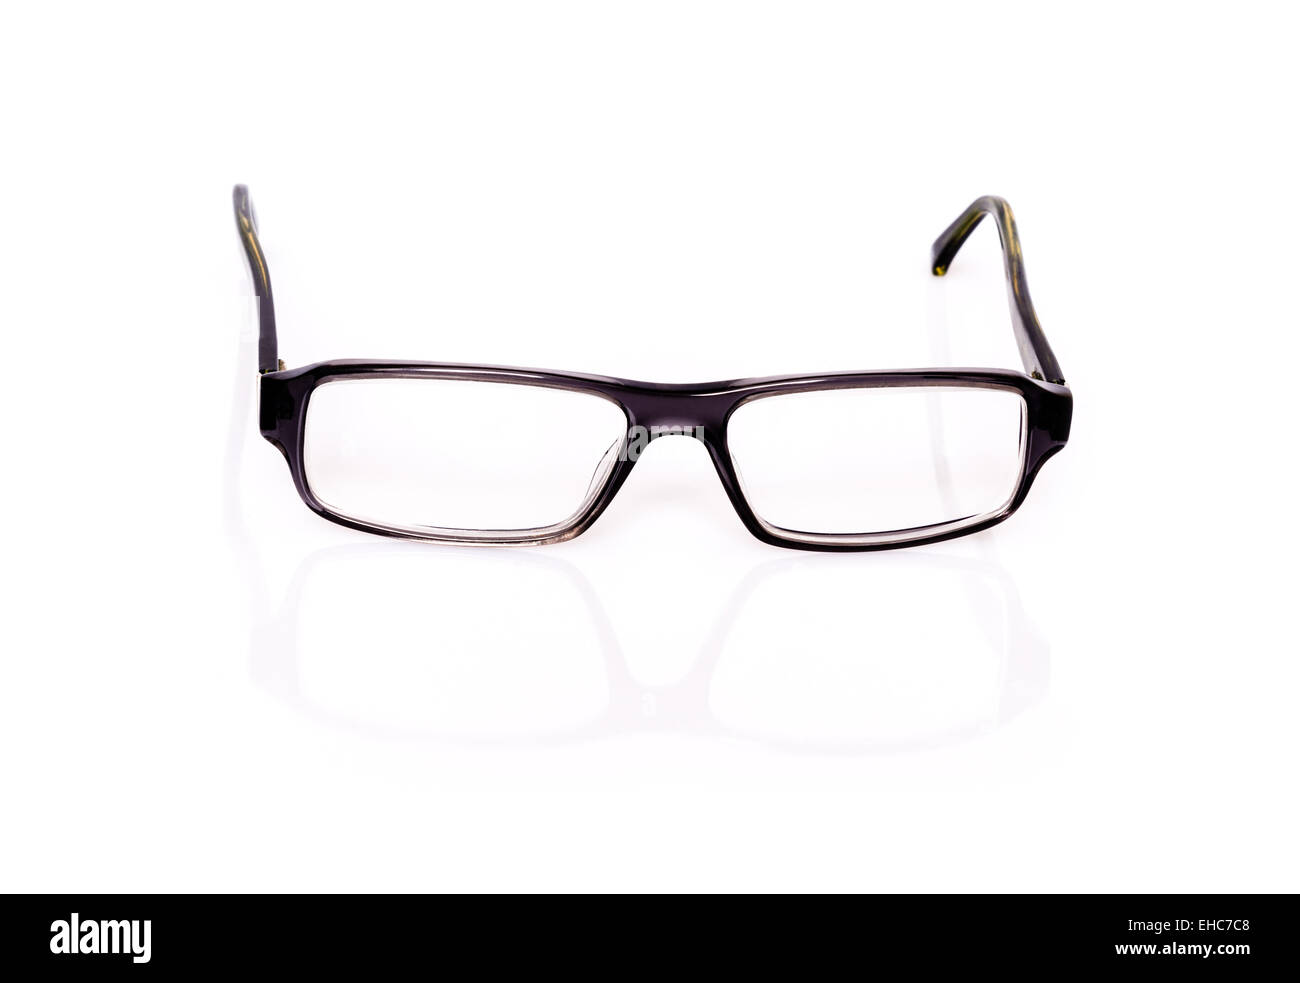 Black And White Spectacles High Resolution Stock Photography and Images ...